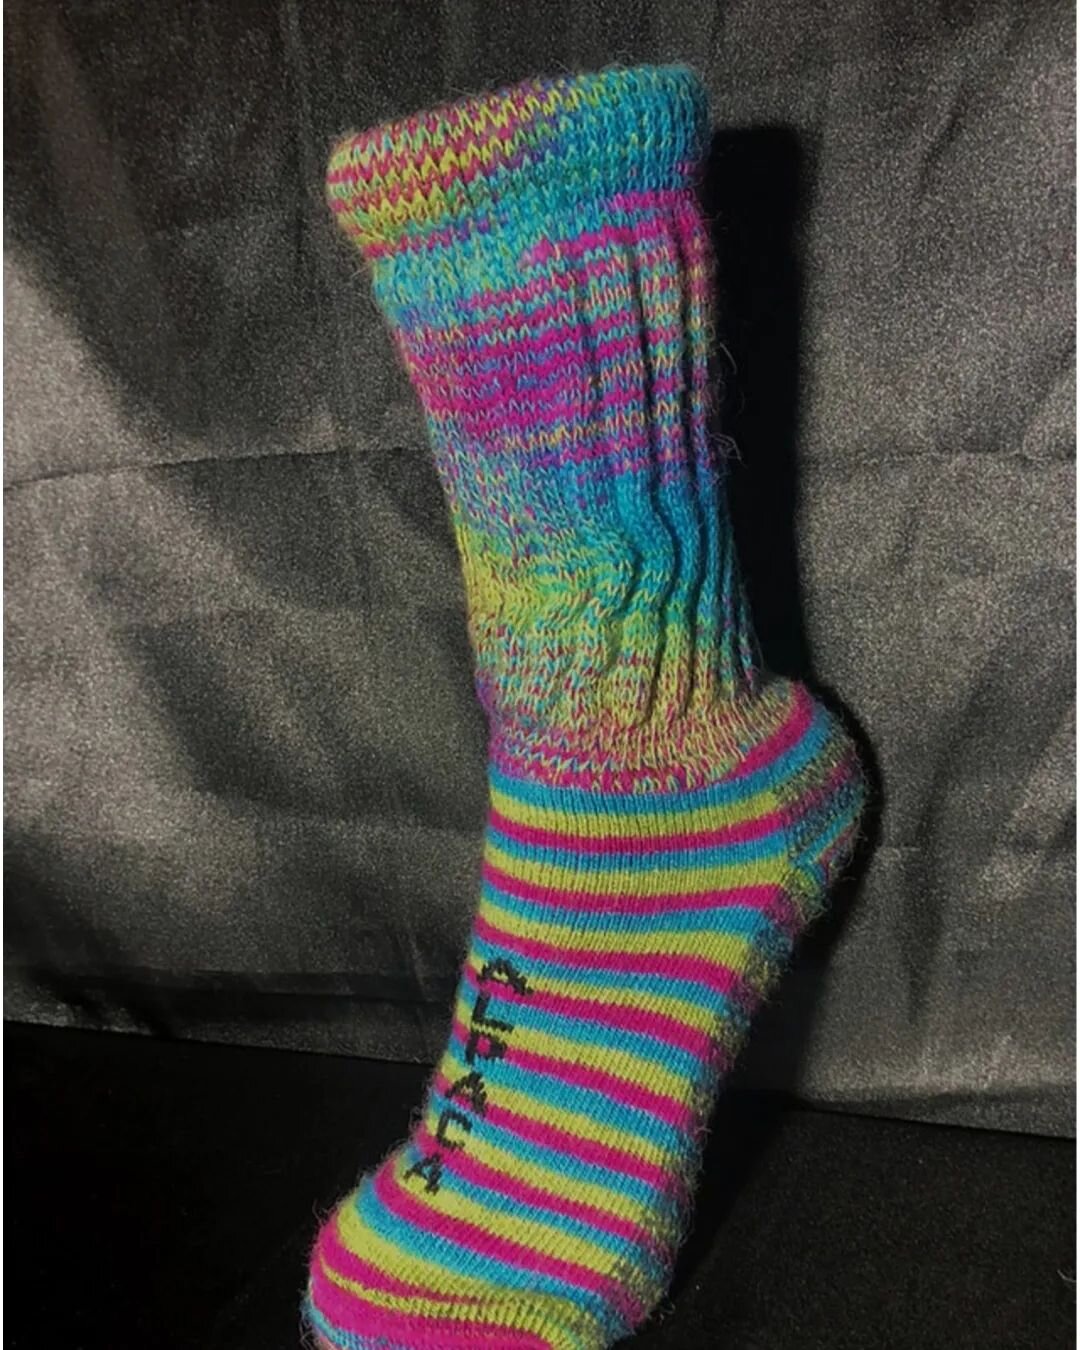 New socks! Extra padding on the bottom and extra stretch on the top make these perfect for anyone with large calfs or for diabetics too. $22  We are open Tuesdays and Saturdays 10-5.  #rainbowalpaca socks #alpacas #alpacafarmstore #graystoneridgealpa